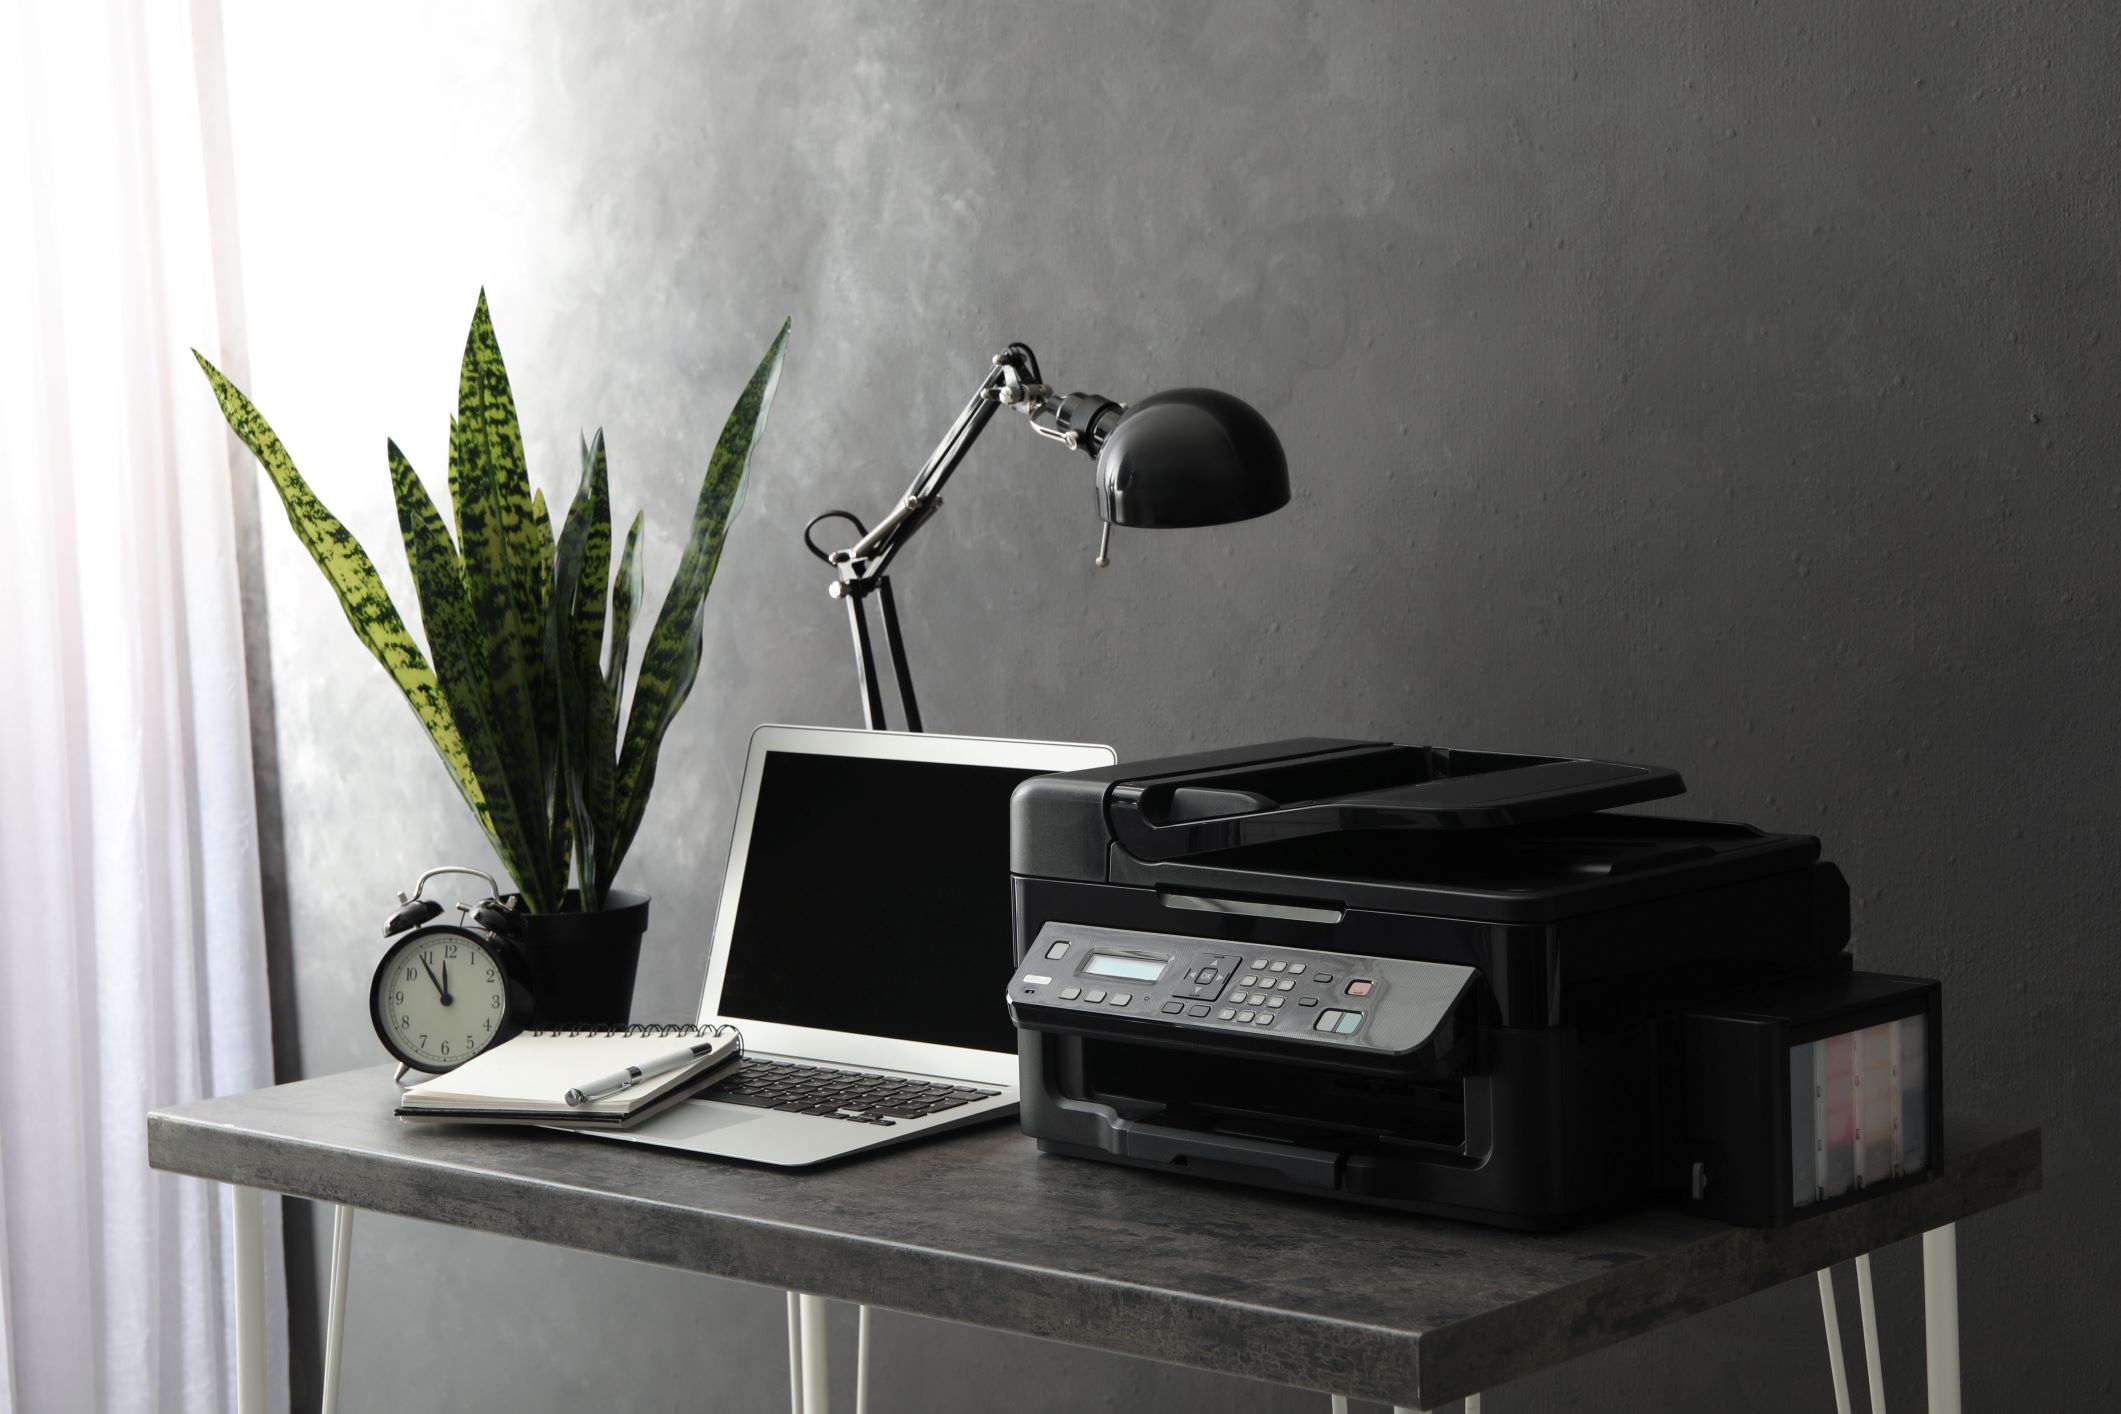 The image presents a neatly organized workspace, featuring an office printer as the central element. The printer is a modern, black multi-function device, capable of printing, scanning, and copying. To its left, there's a laptop open on a desk, alongside a spiral notebook and a silver pen, ready for note-taking. A classic black analog clock indicates the time, while a potted plant with long, variegated leaves adds a touch of greenery and life to the scene. A desk lamp with an adjustable arm is poised above, providing focused illumination. The overall setting suggests a professional and efficient environment, with the office printer serving as an essential tool for daily business operations and document handling.